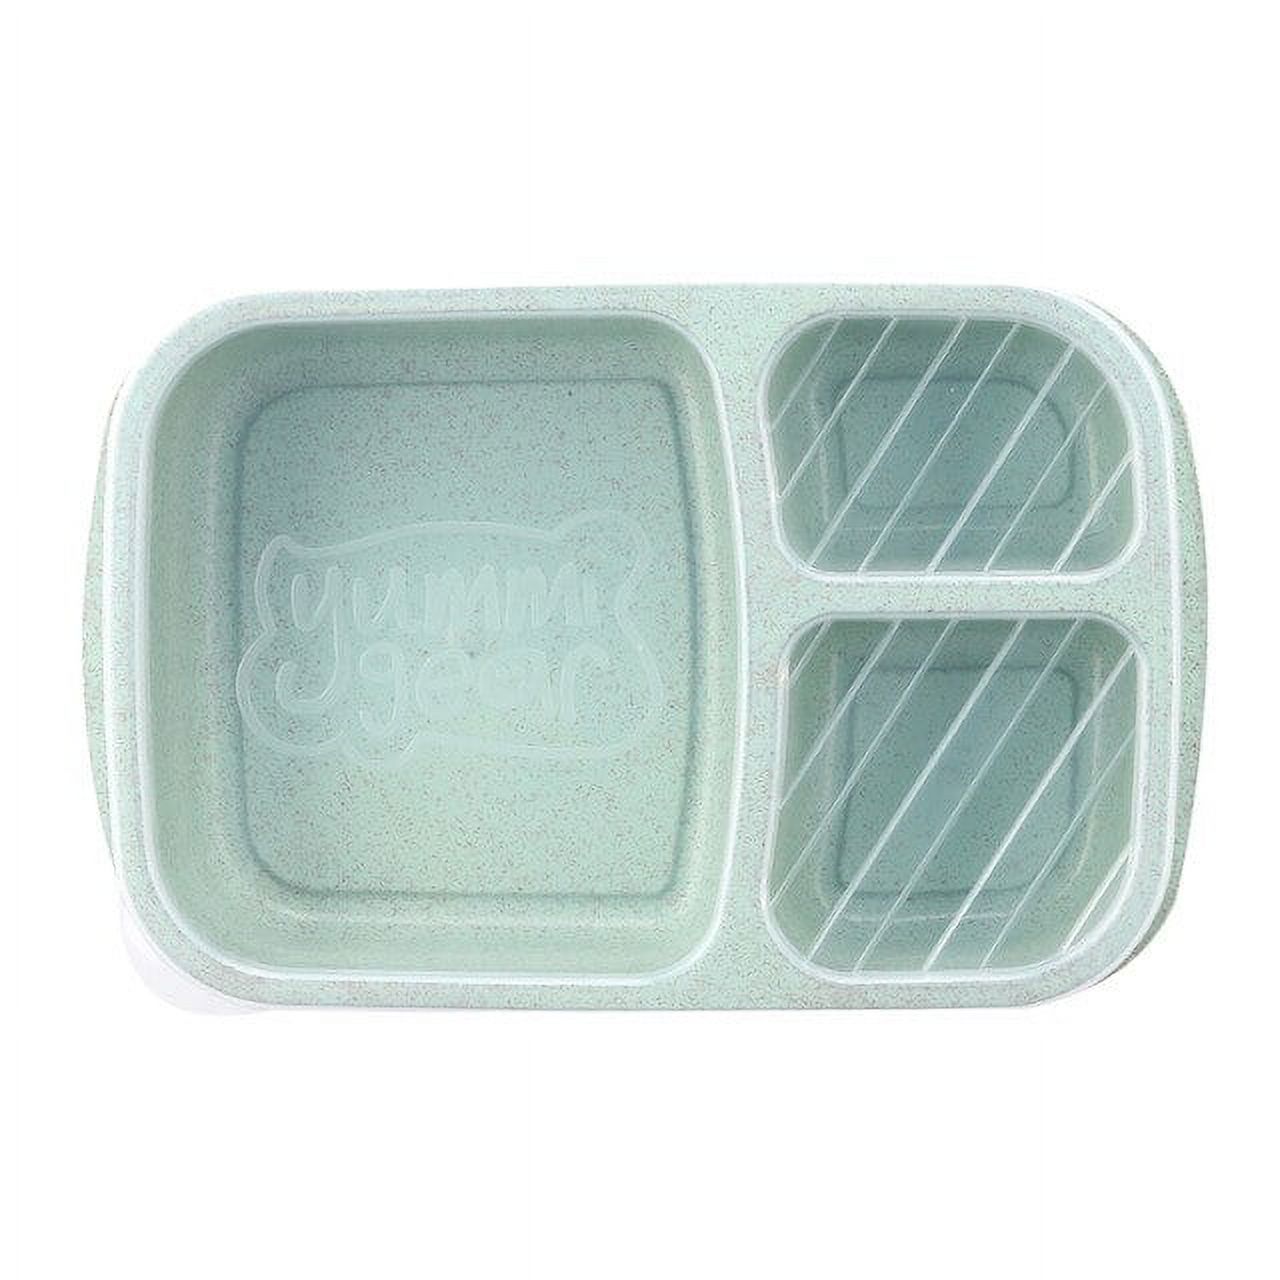 3 Layer Plastic Lunch Box Food Container Bento Lunch Boxes With 3-Compartment Microwave Picnic Food Container Storage Box - image 1 of 5